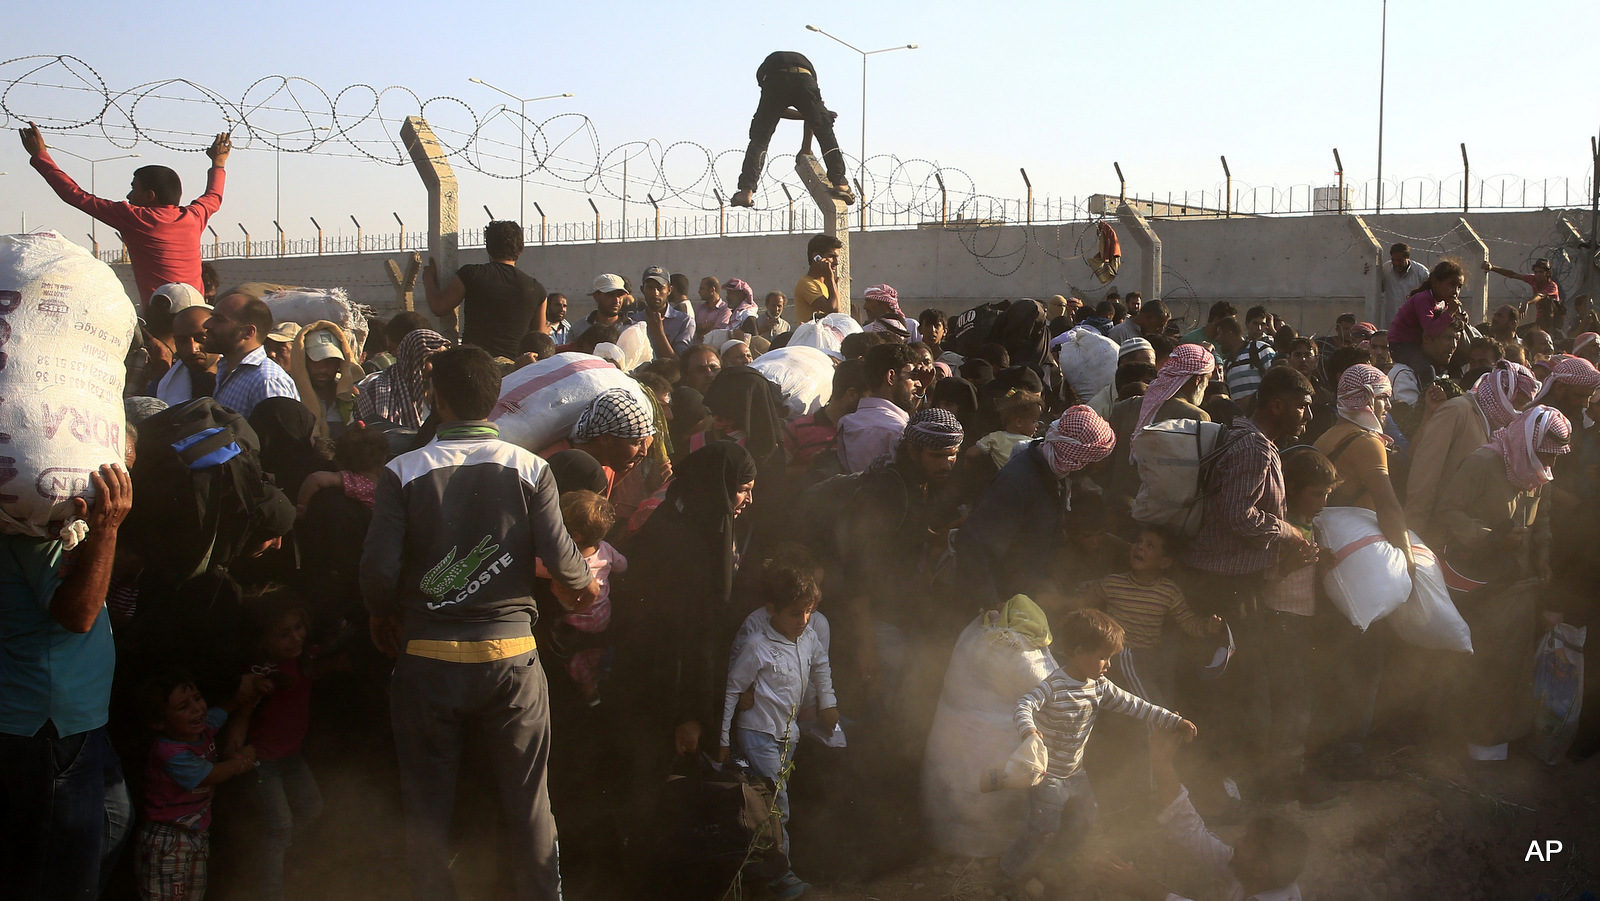 Syrian refugees cross into Turkey from Syria